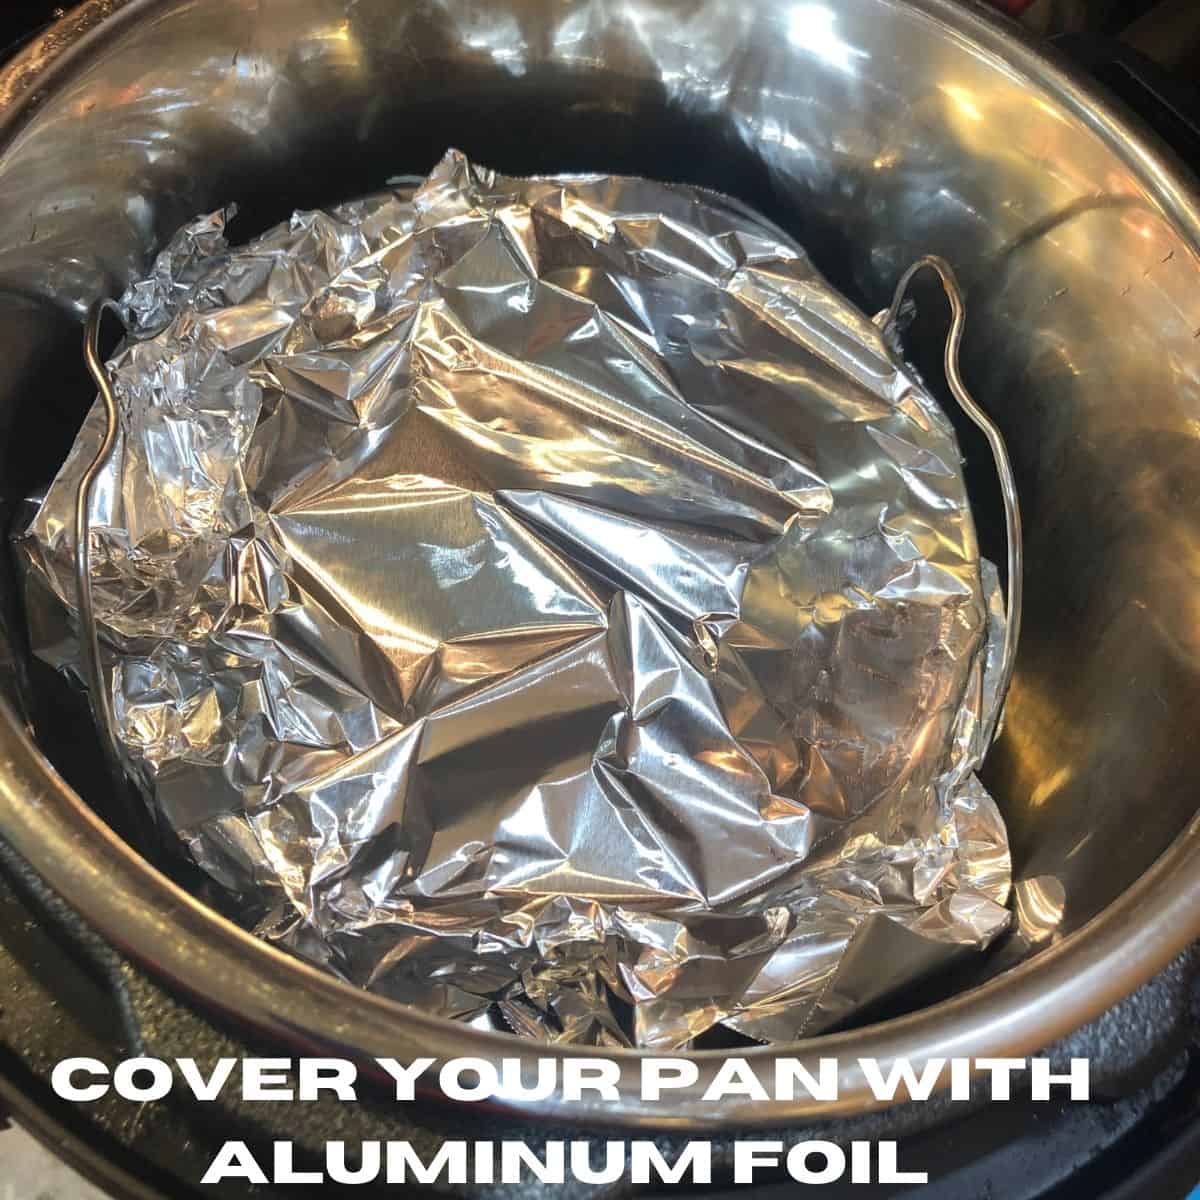 Lasagna covered in foil in an instant pot